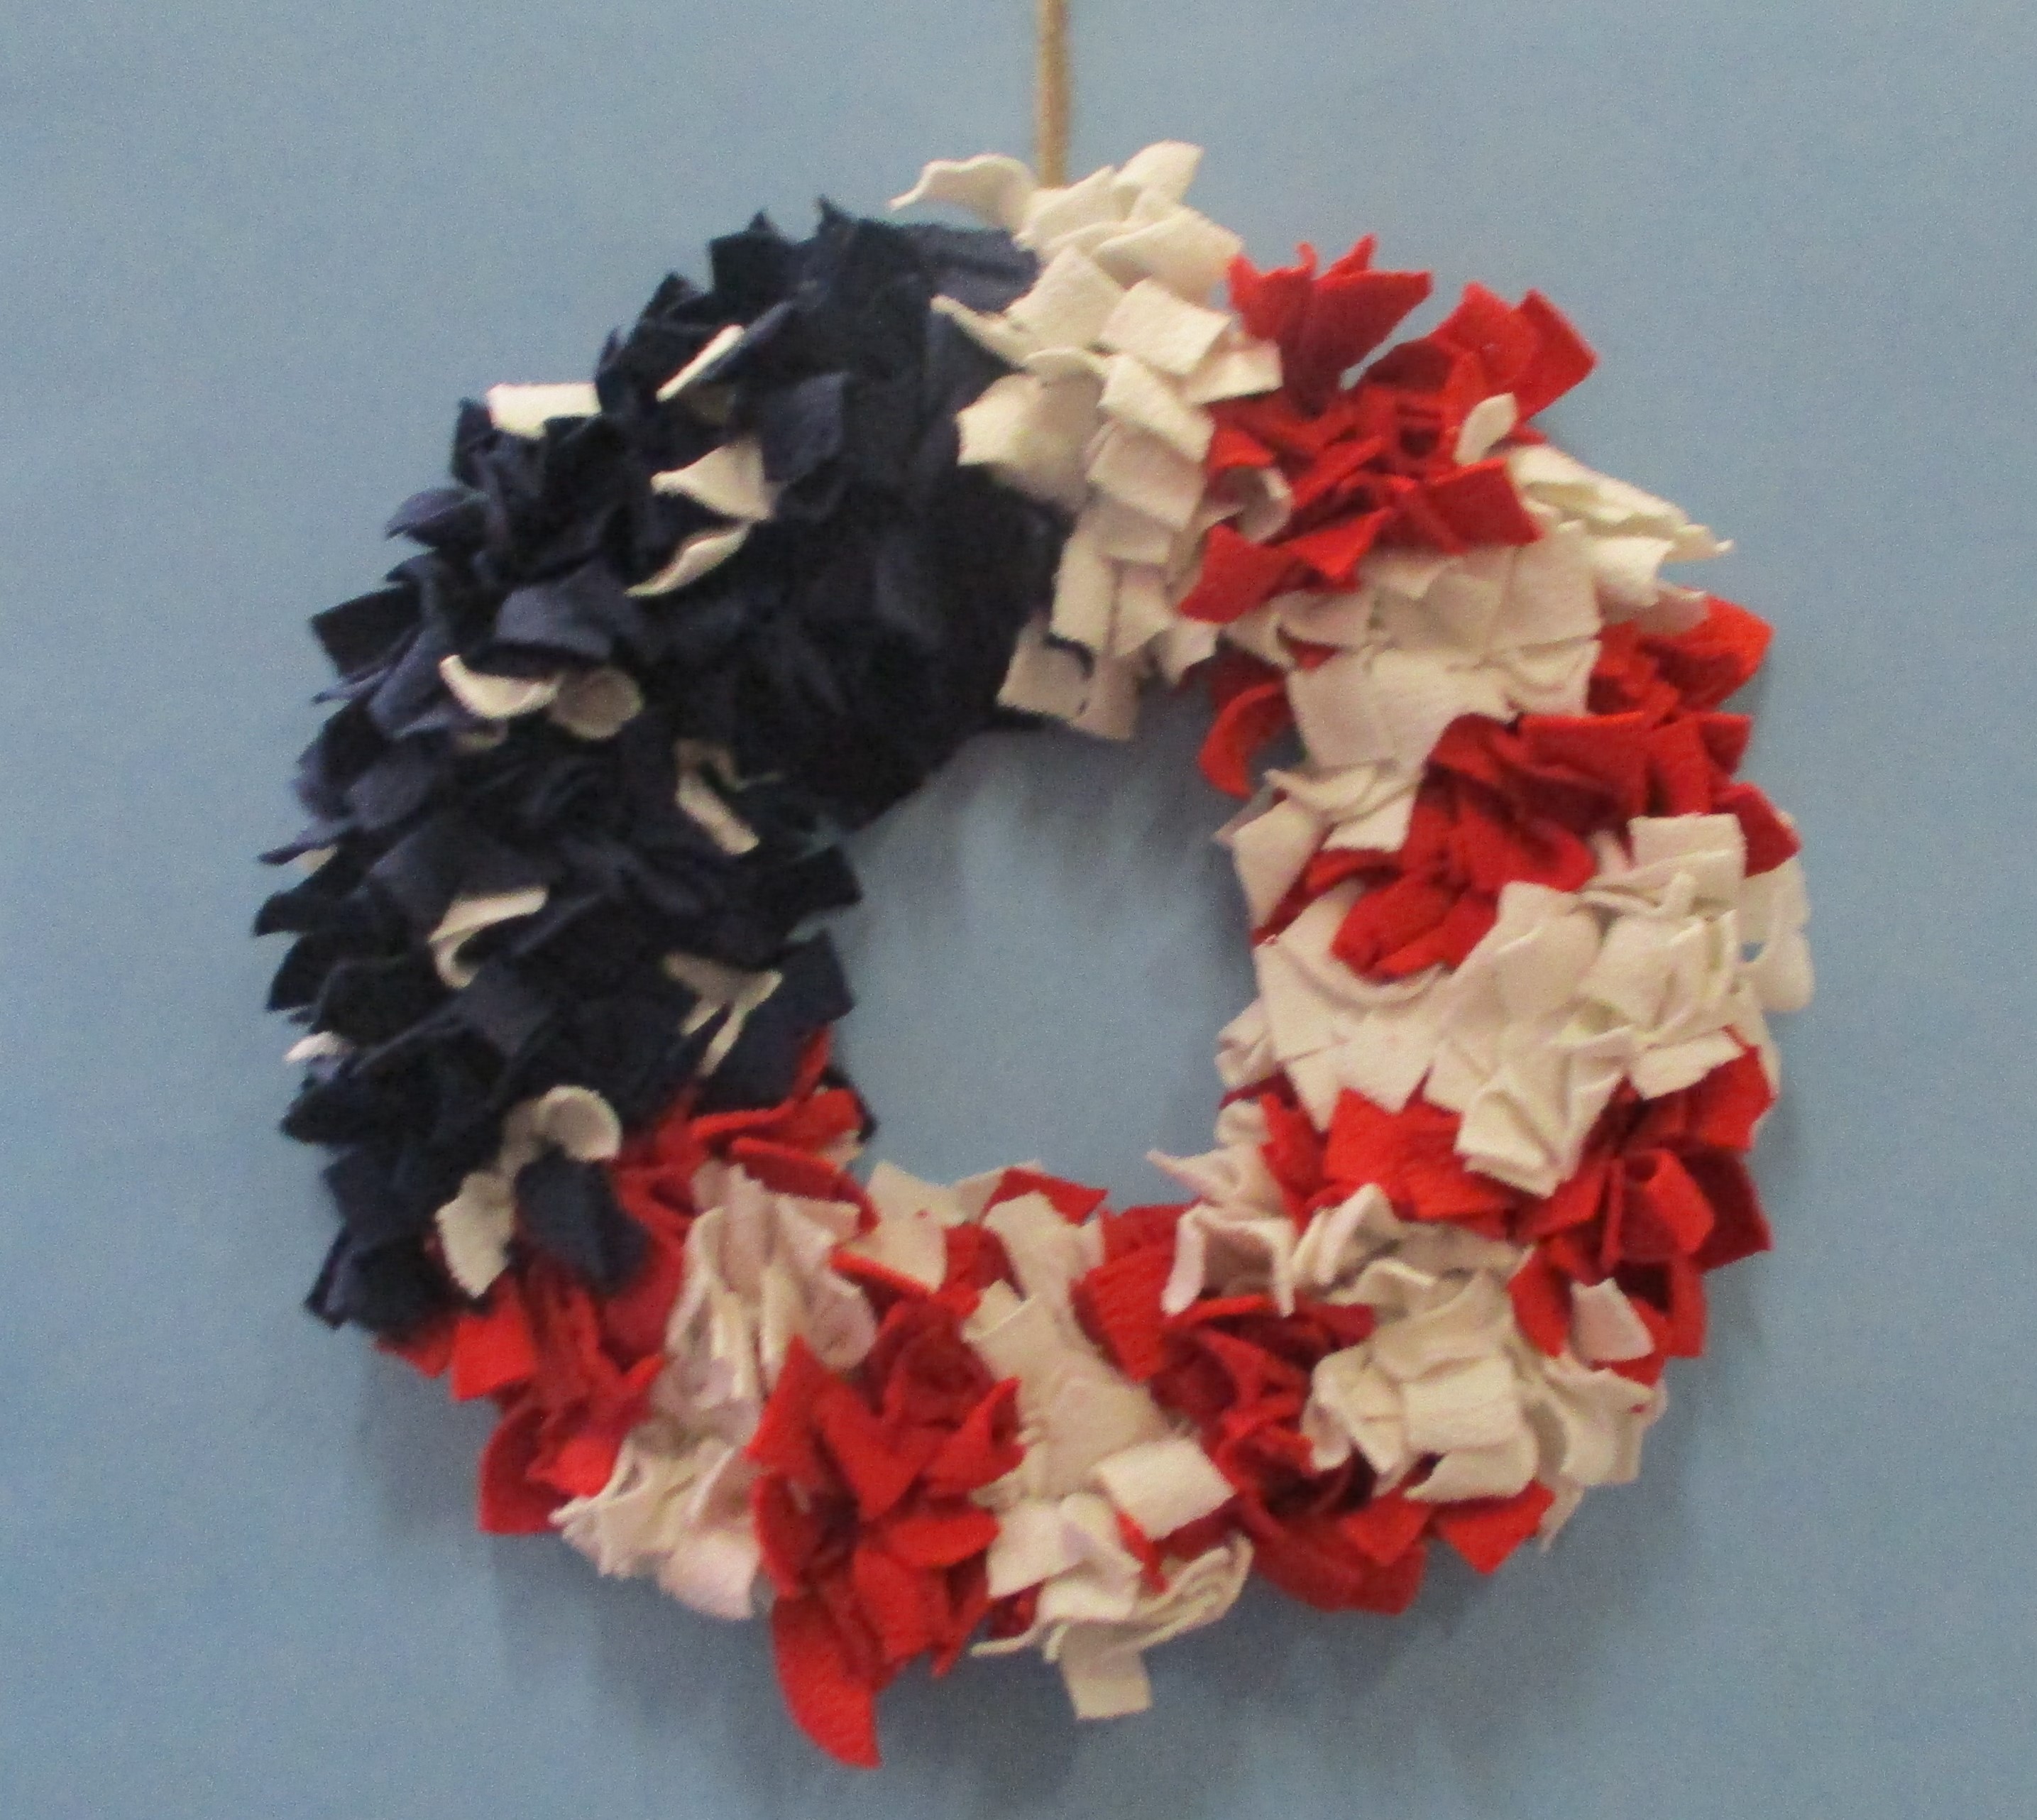 Strips of red, white, and blue fabric used to make a patriotic wreath.